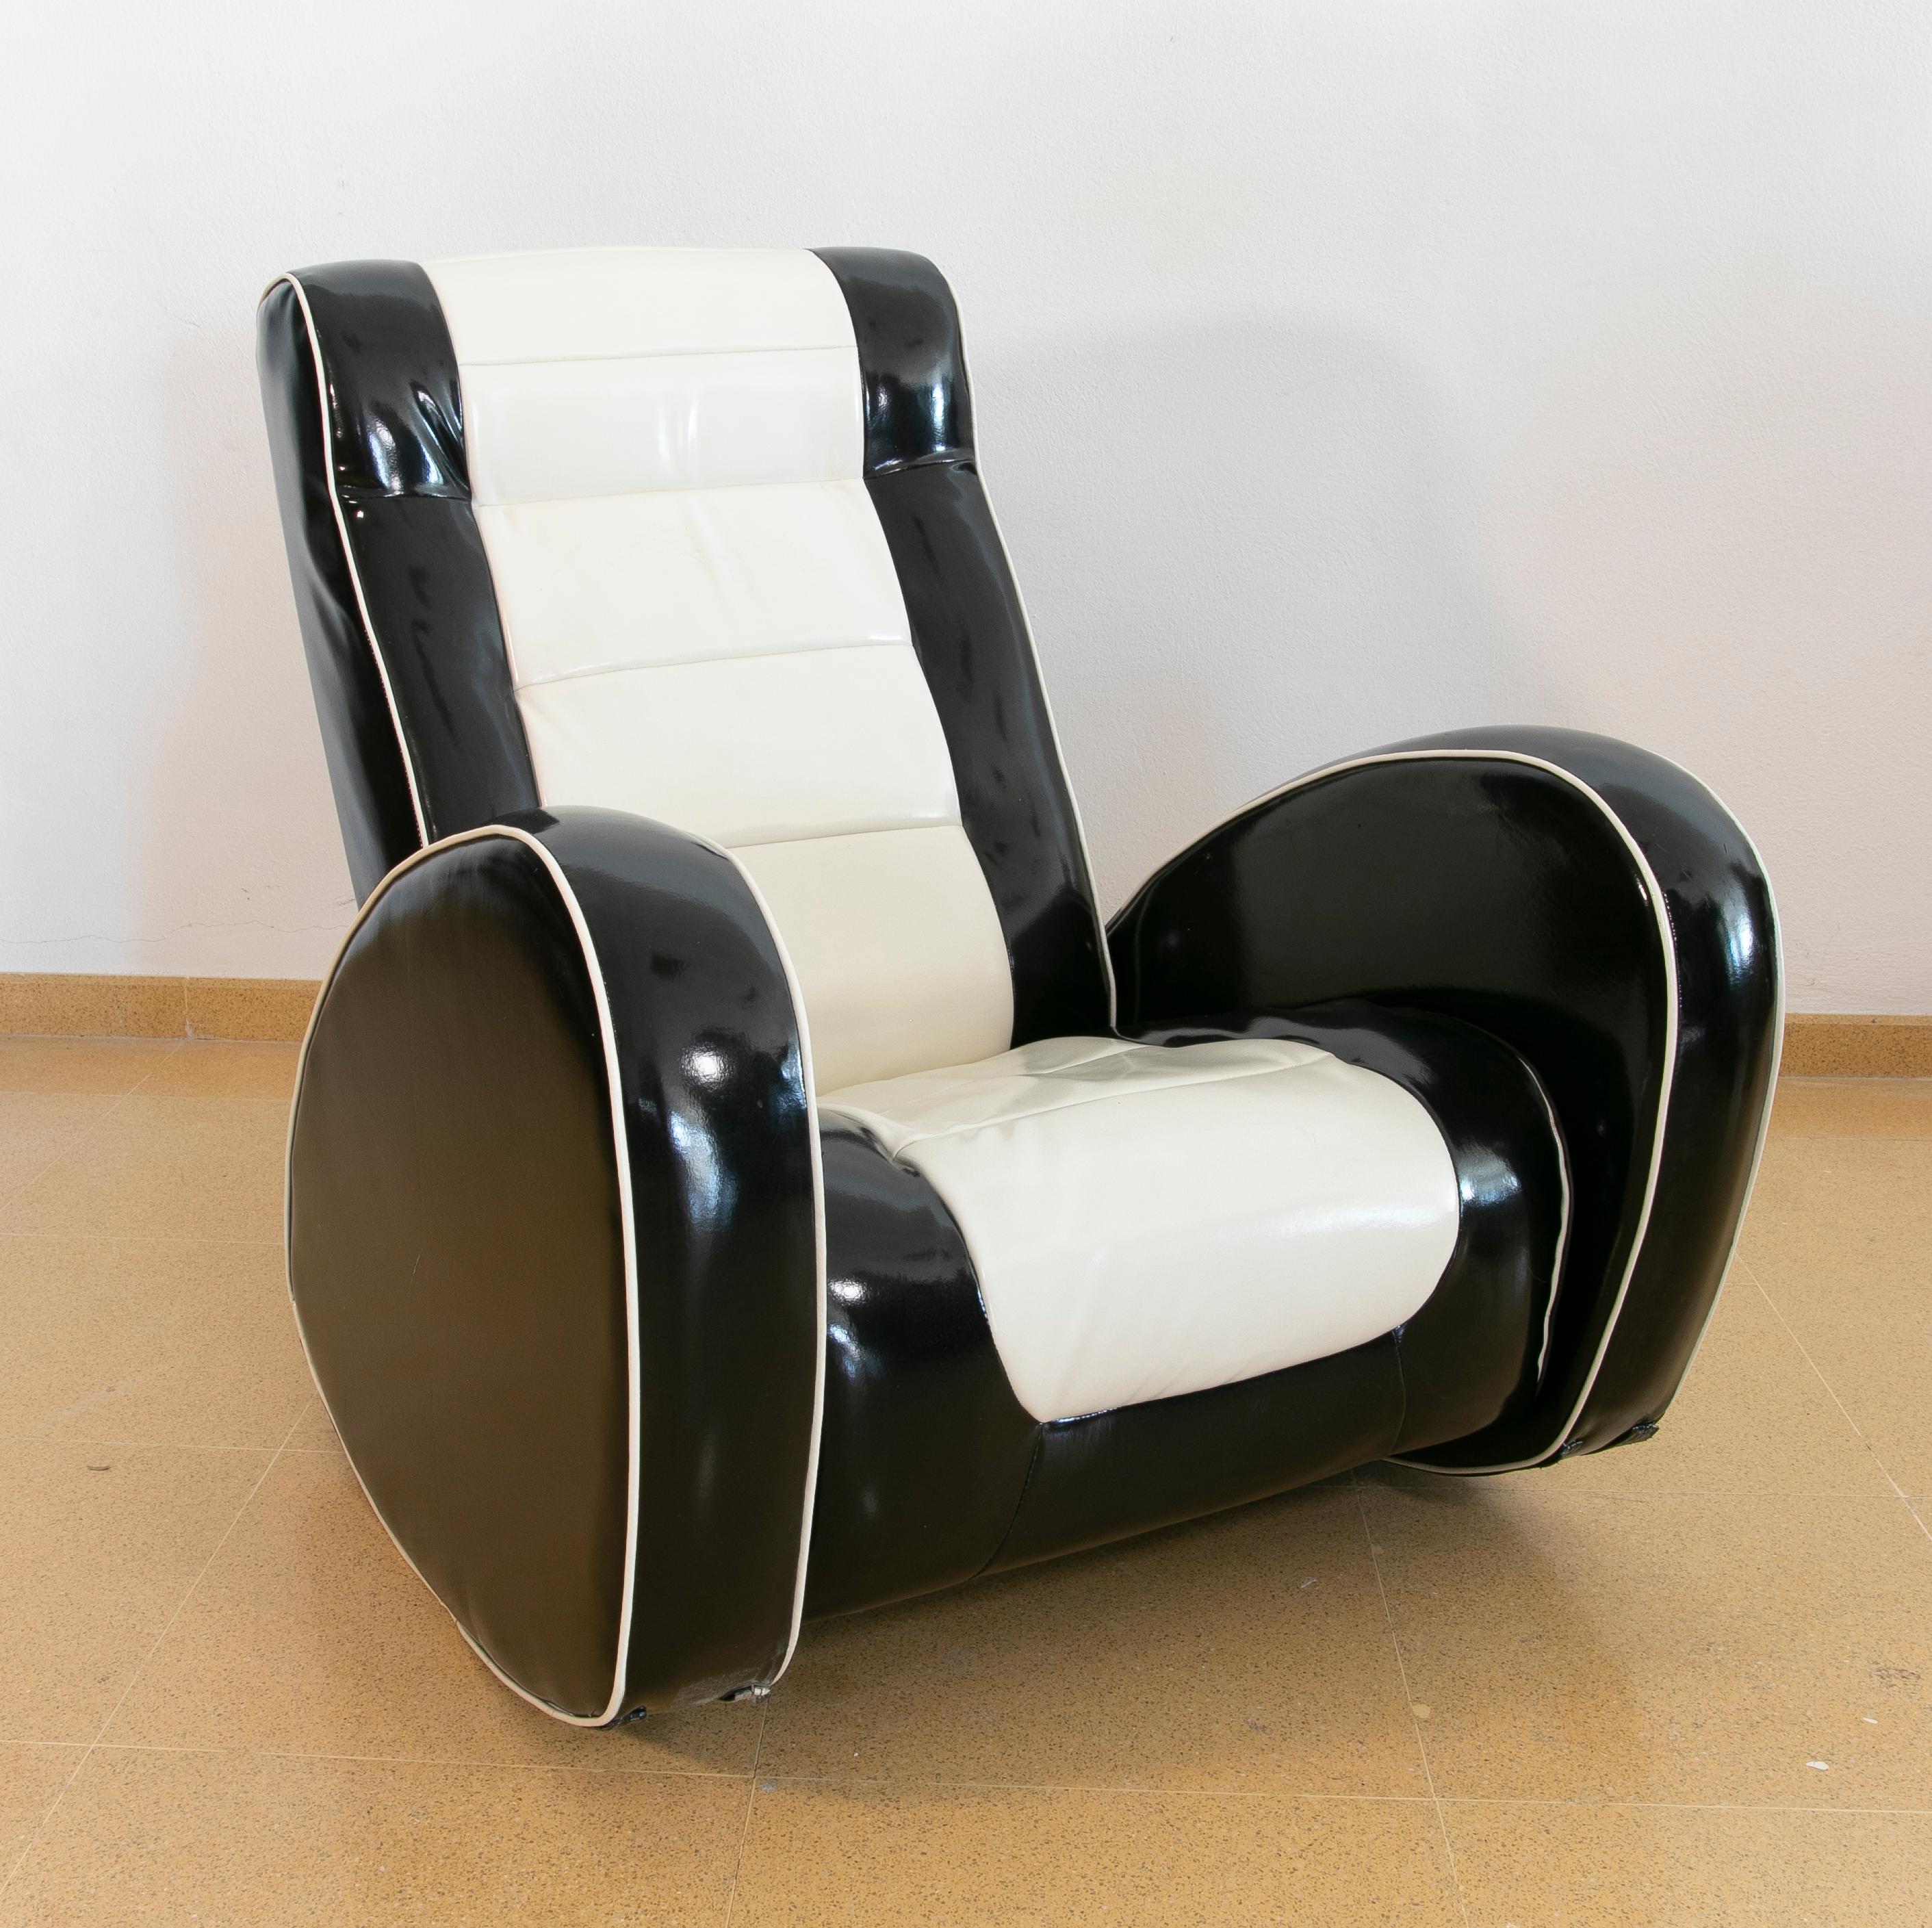 1980s Black and white rocking armchair.